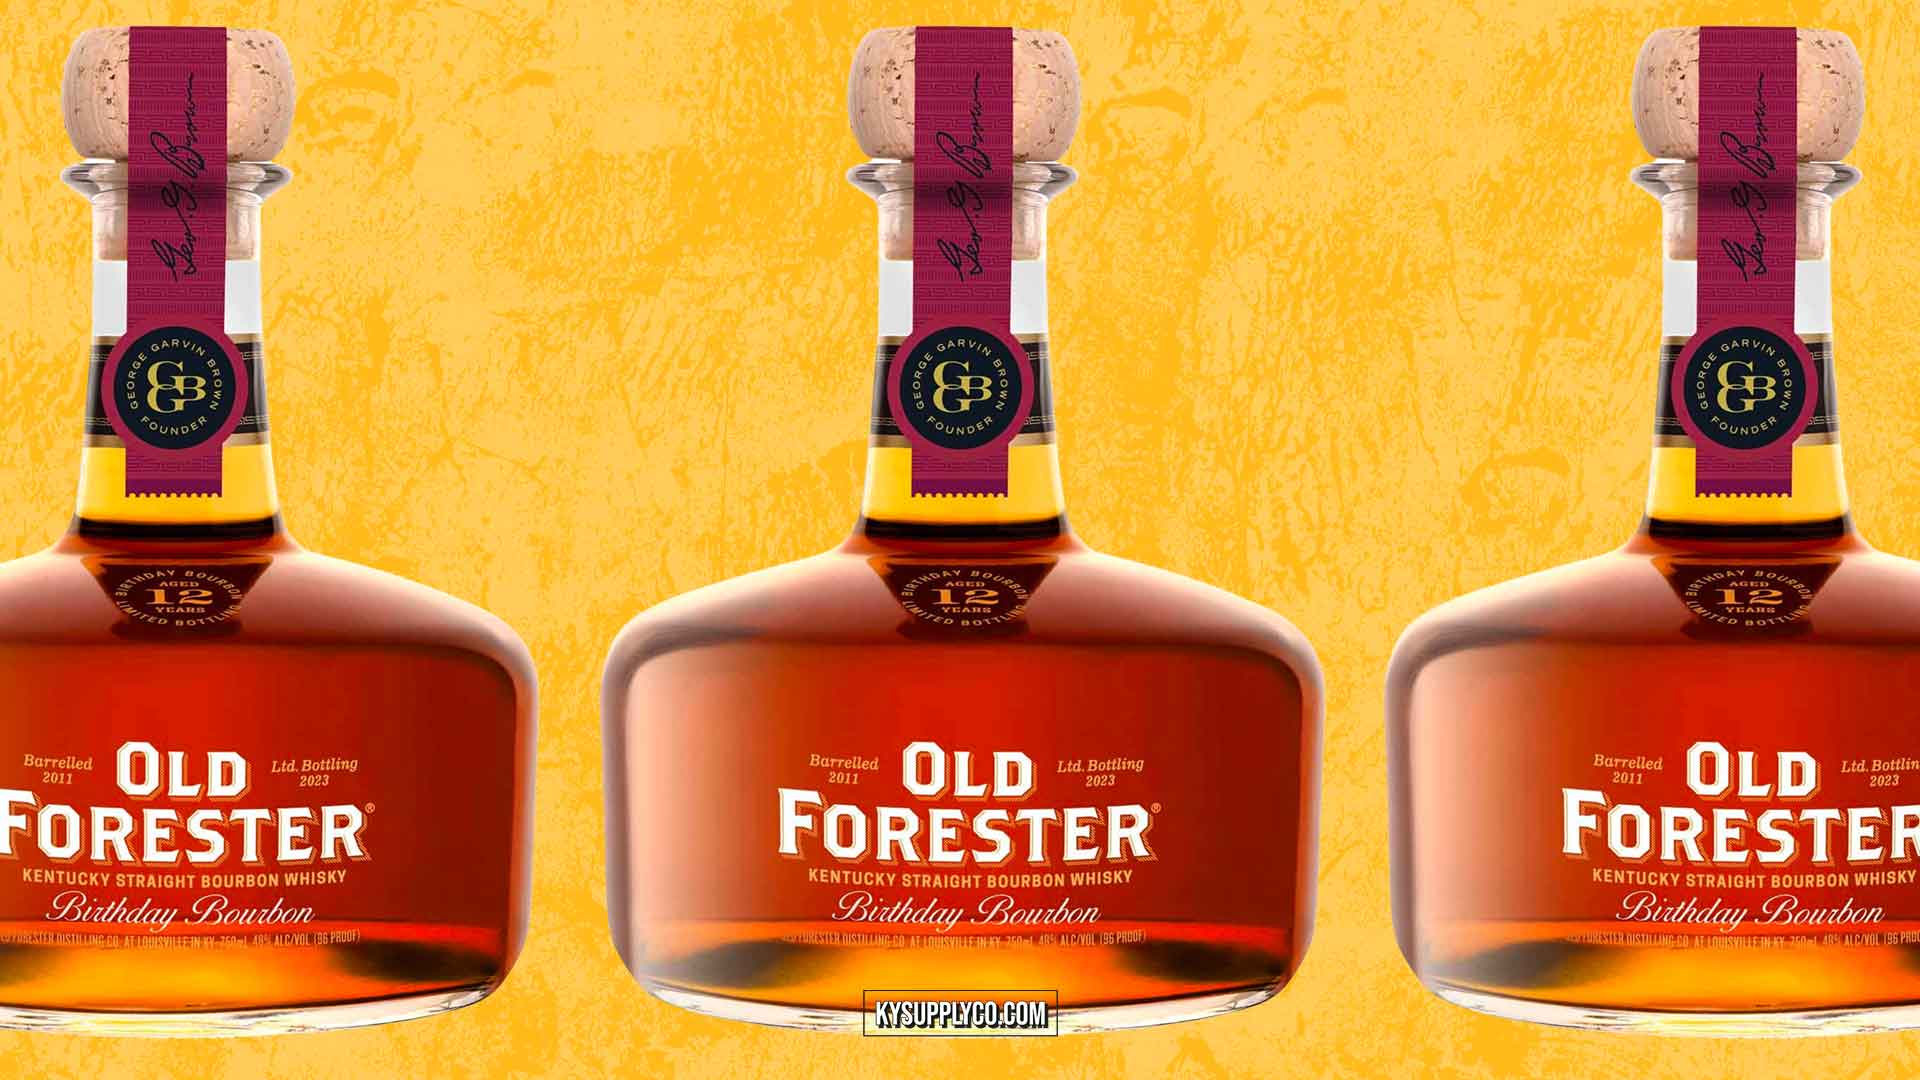 Old Forester Birthday Bourbon Review, Price, Proof, Release, Lottery - KY Supply Co